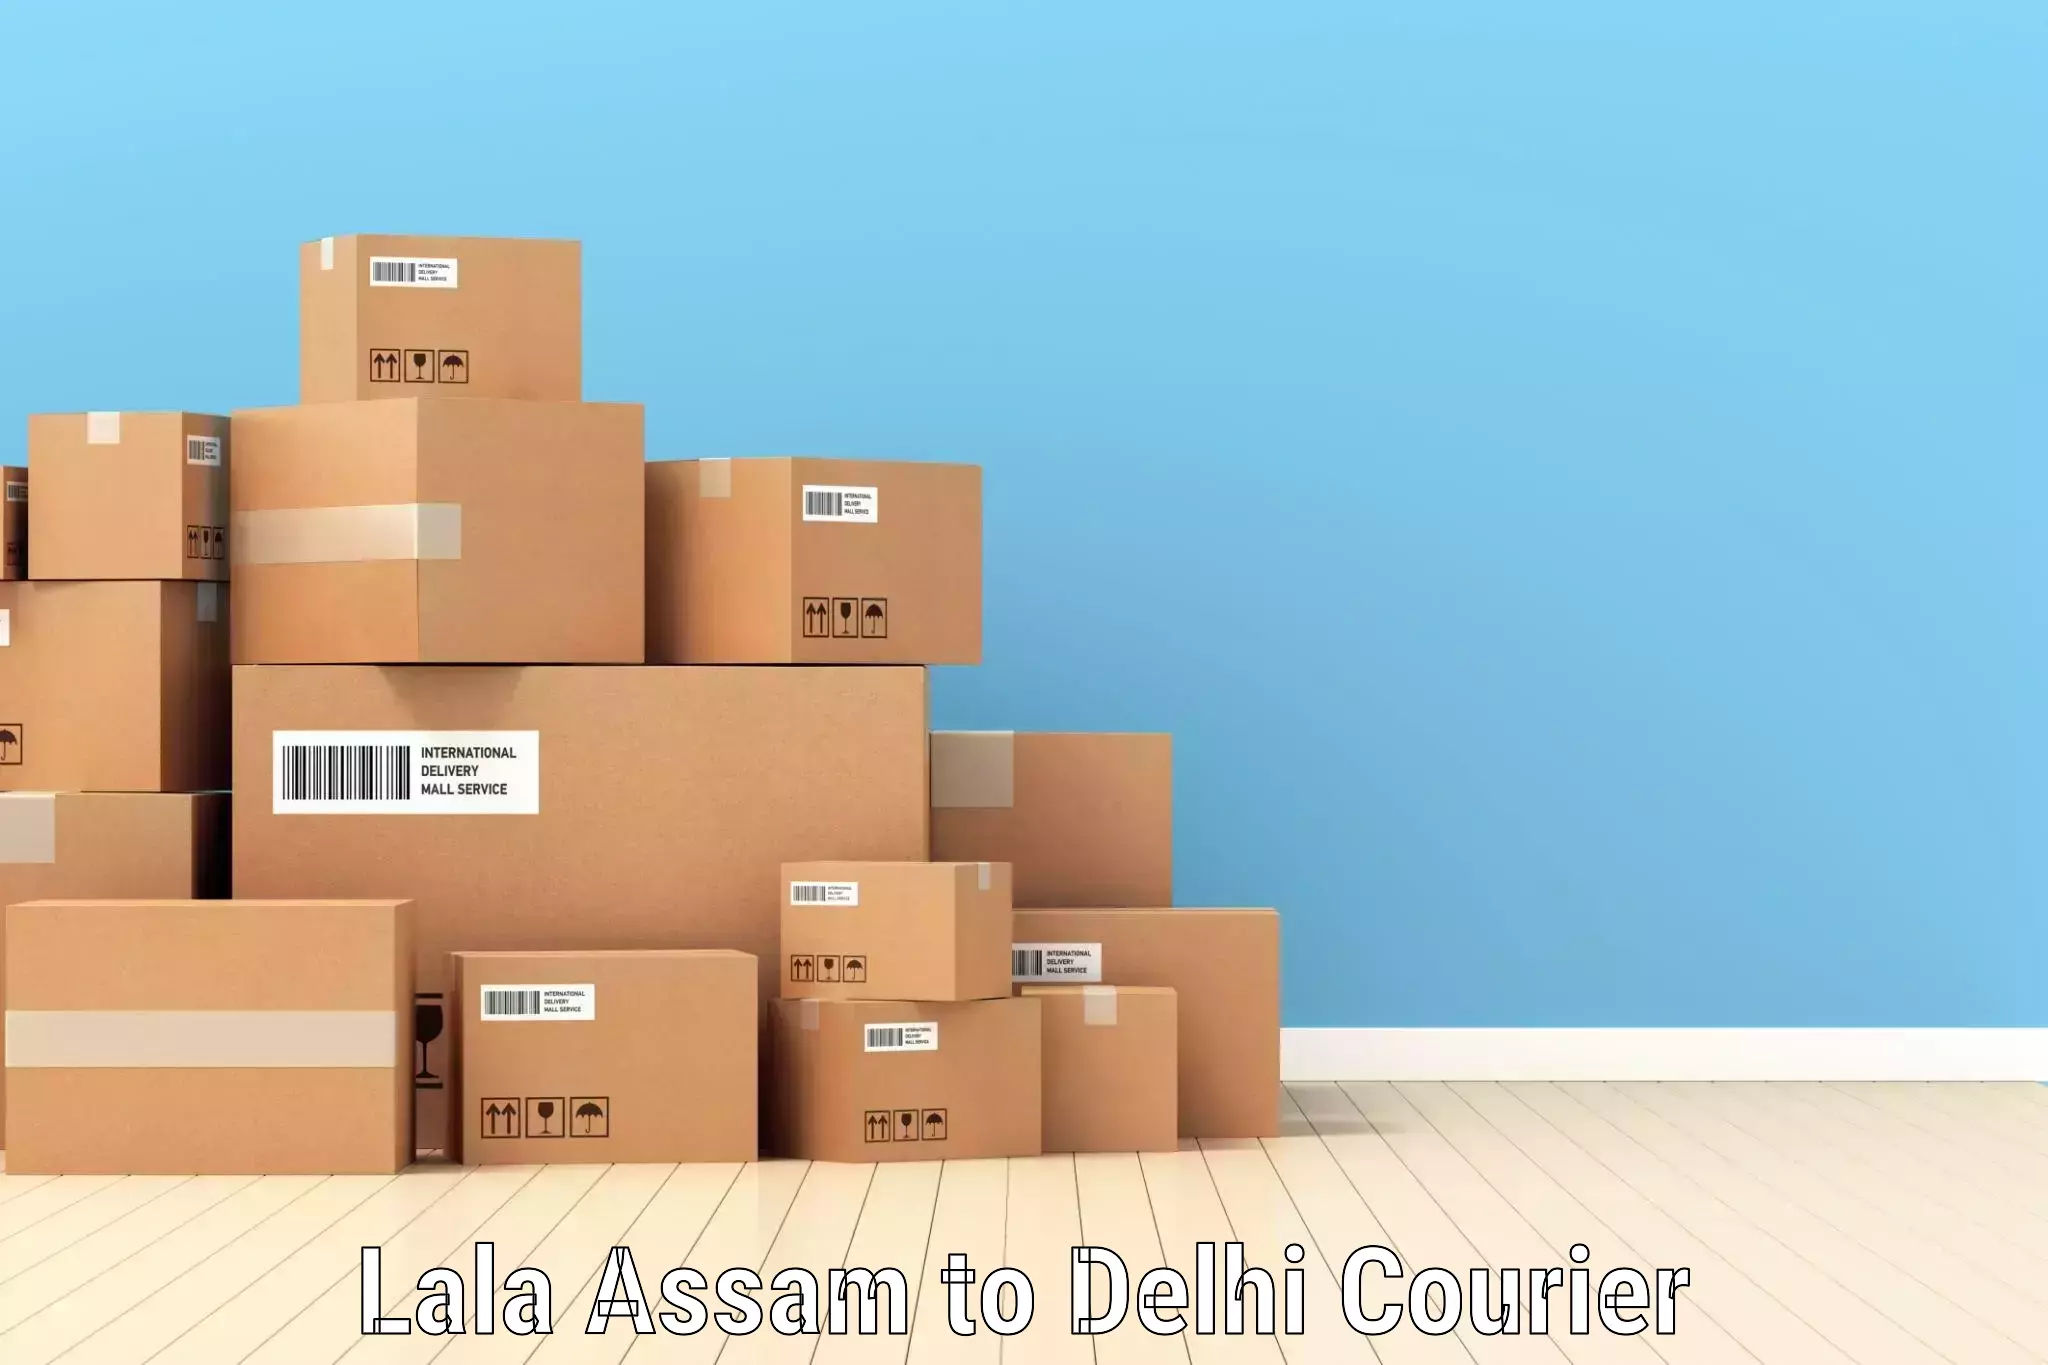 End-to-end delivery in Lala Assam to Delhi